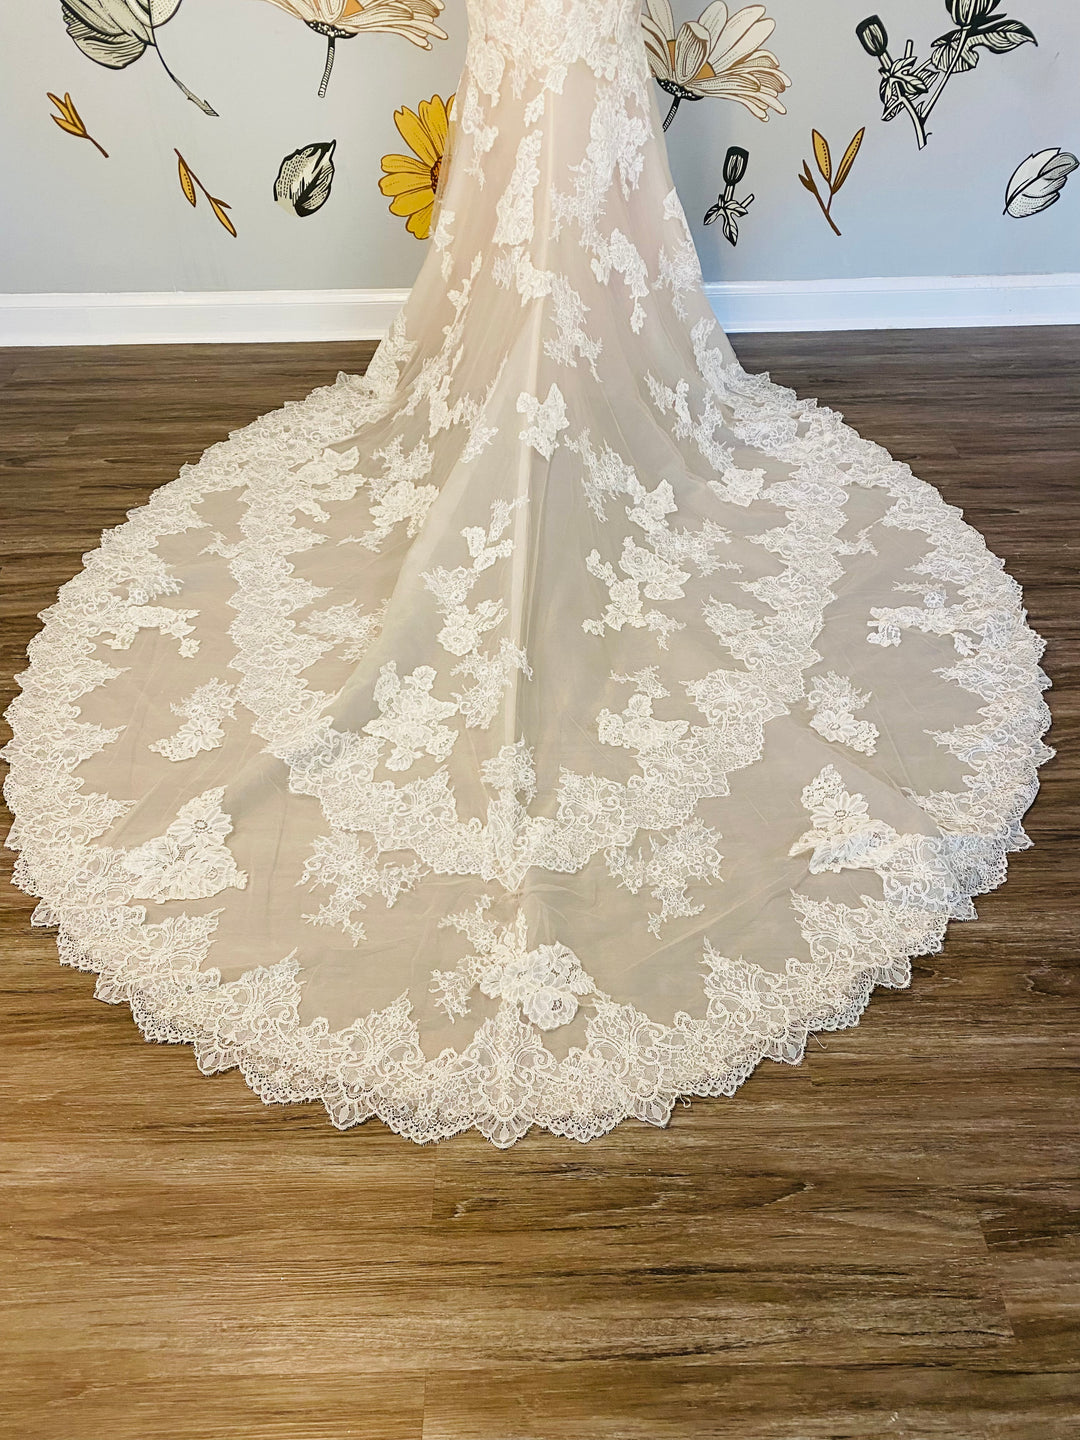 The 'Melanie" Gown by Enzoani Size 10